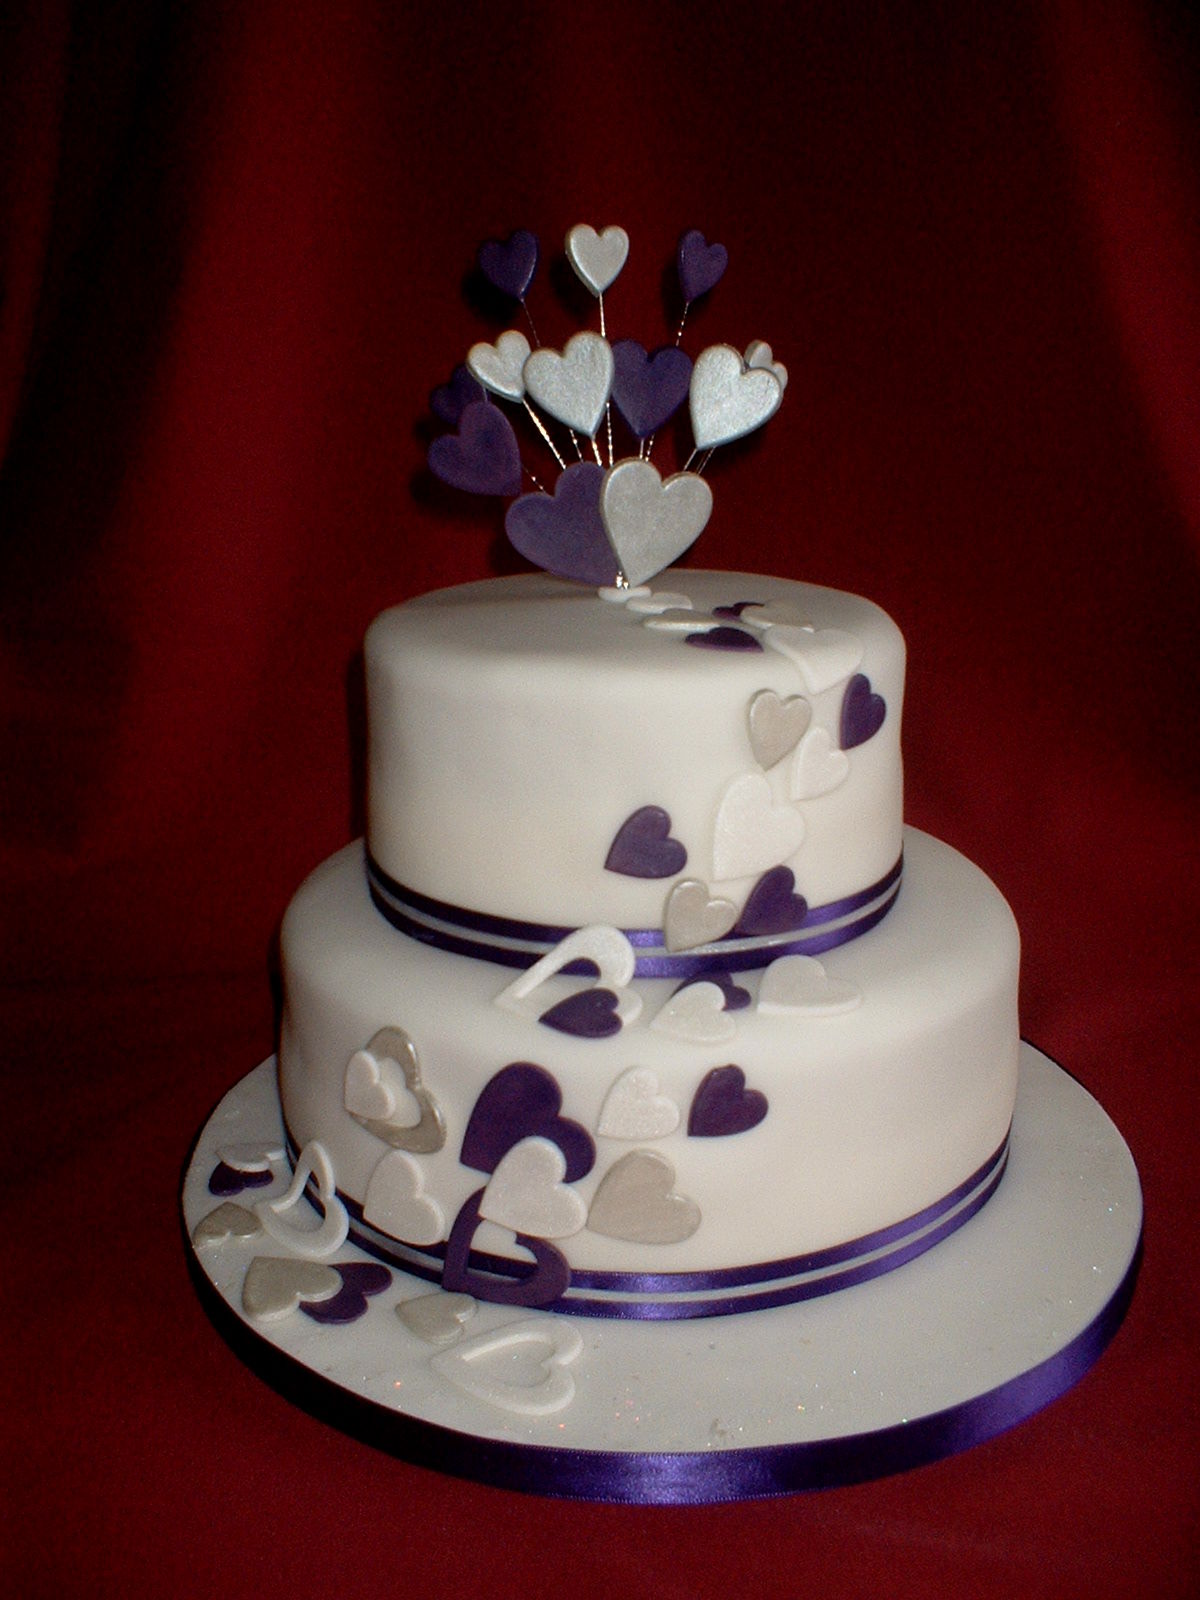 12 Photos of Simple Wedding Cakes With Hearts